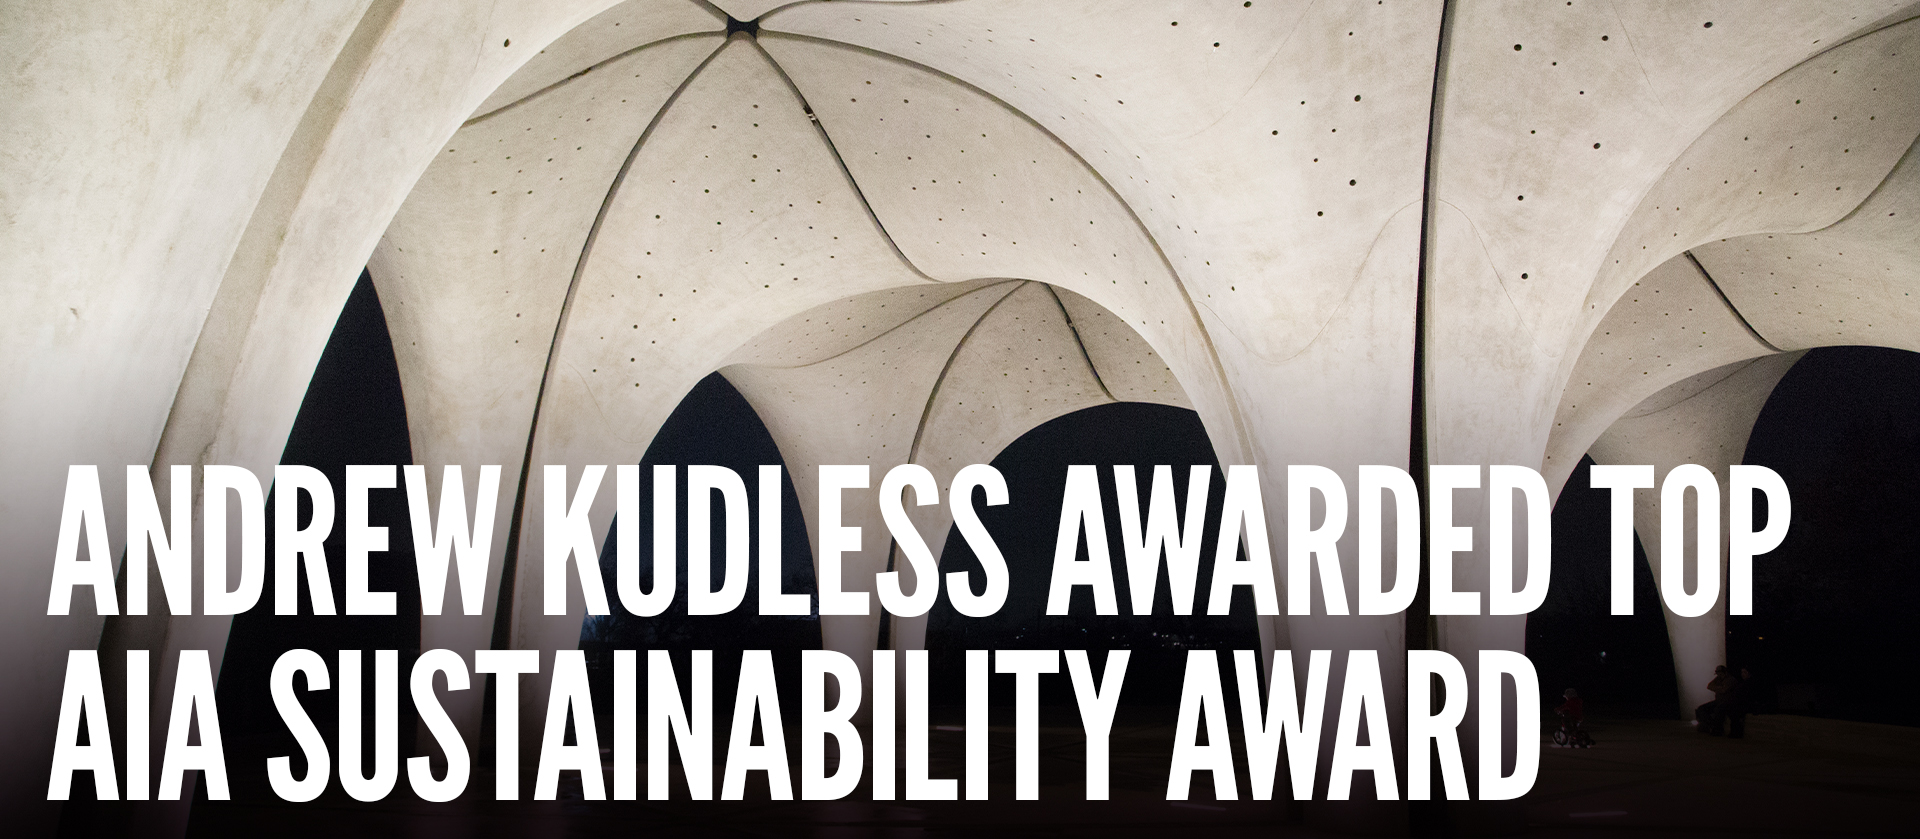 Kendall Professor Andrew Kudless Awarded Top AIA National Sustainability Award